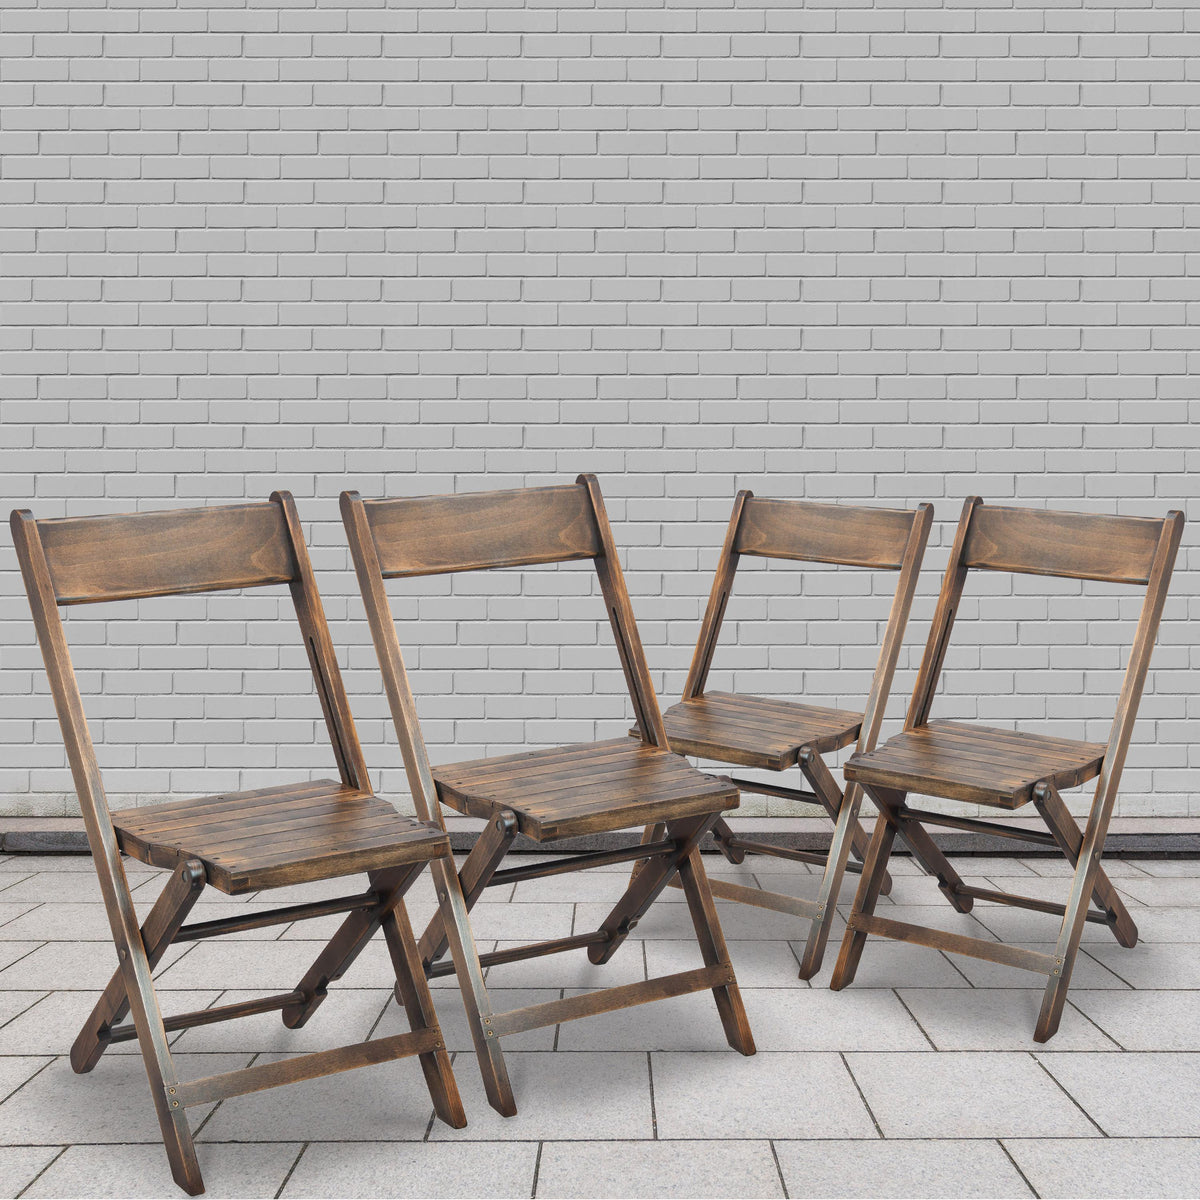 Slatted Wood Folding Wedding Chair - Event Chair - Antique Black, Set of 4